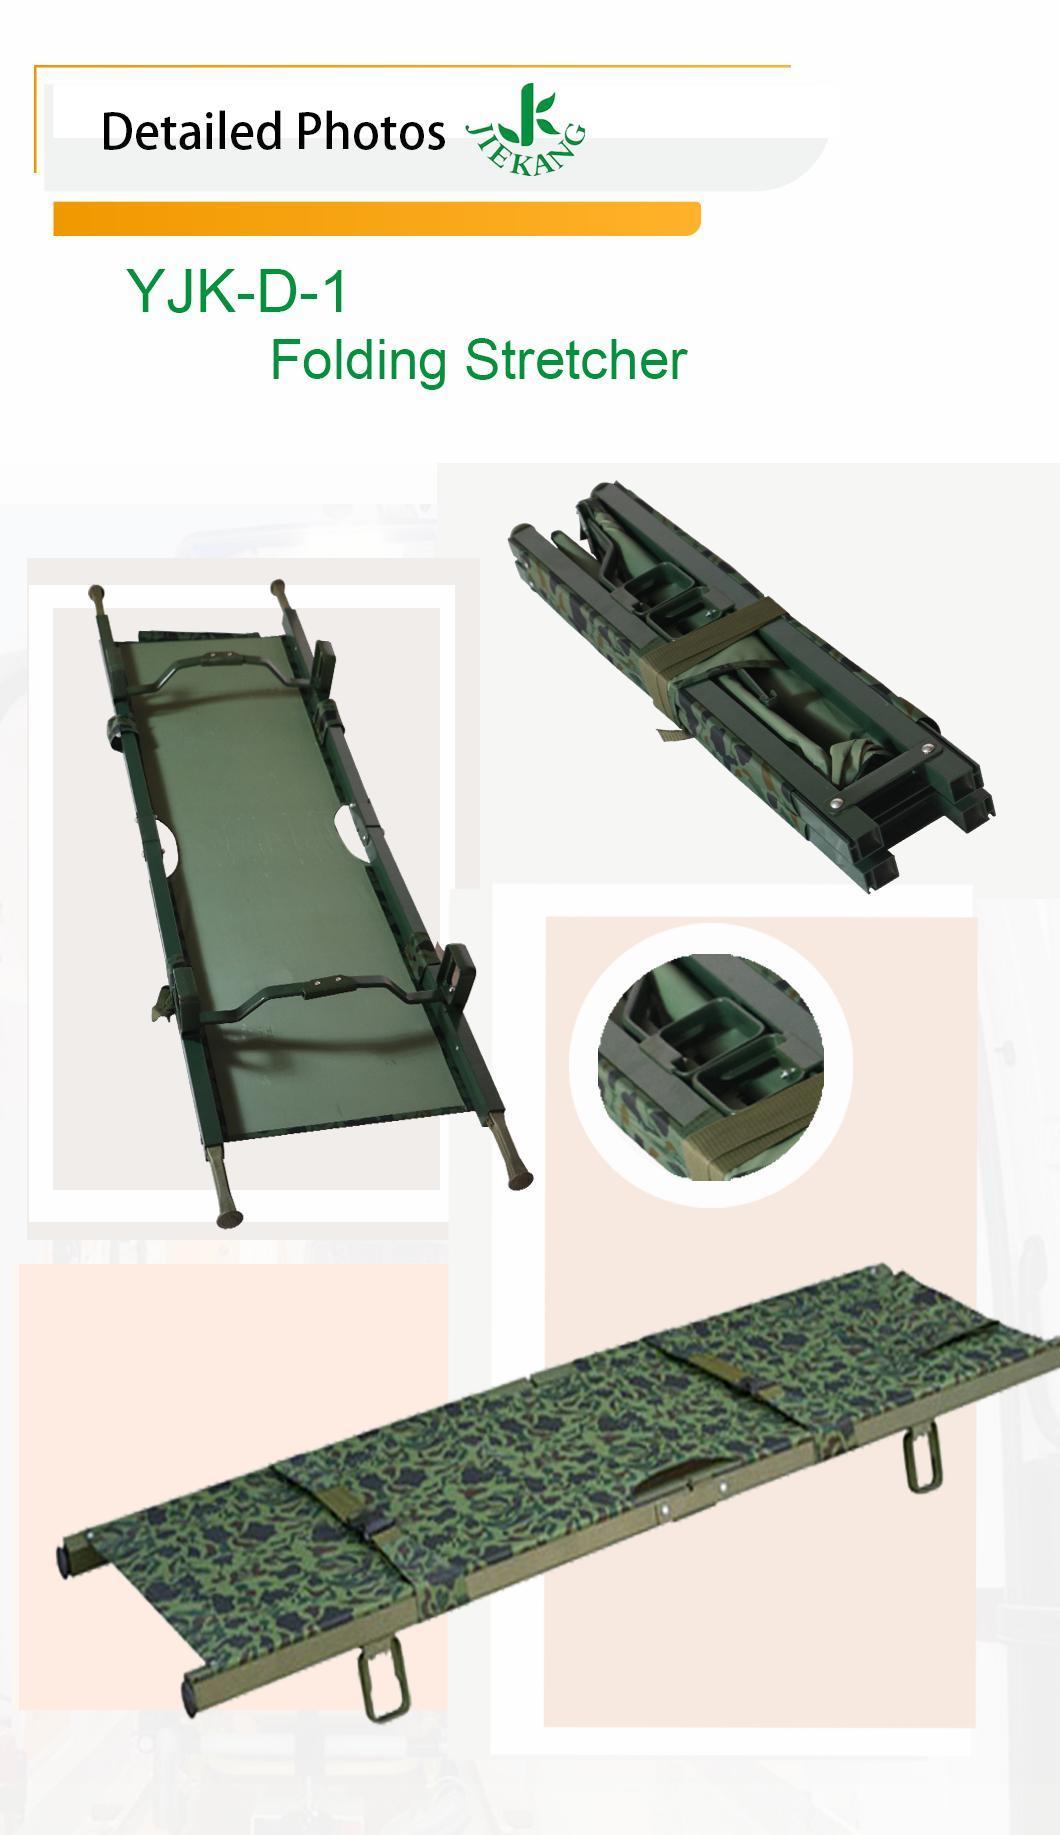 Good Quality Rescue Aluminum Alloy Collapsible Stretcher for Ambulance